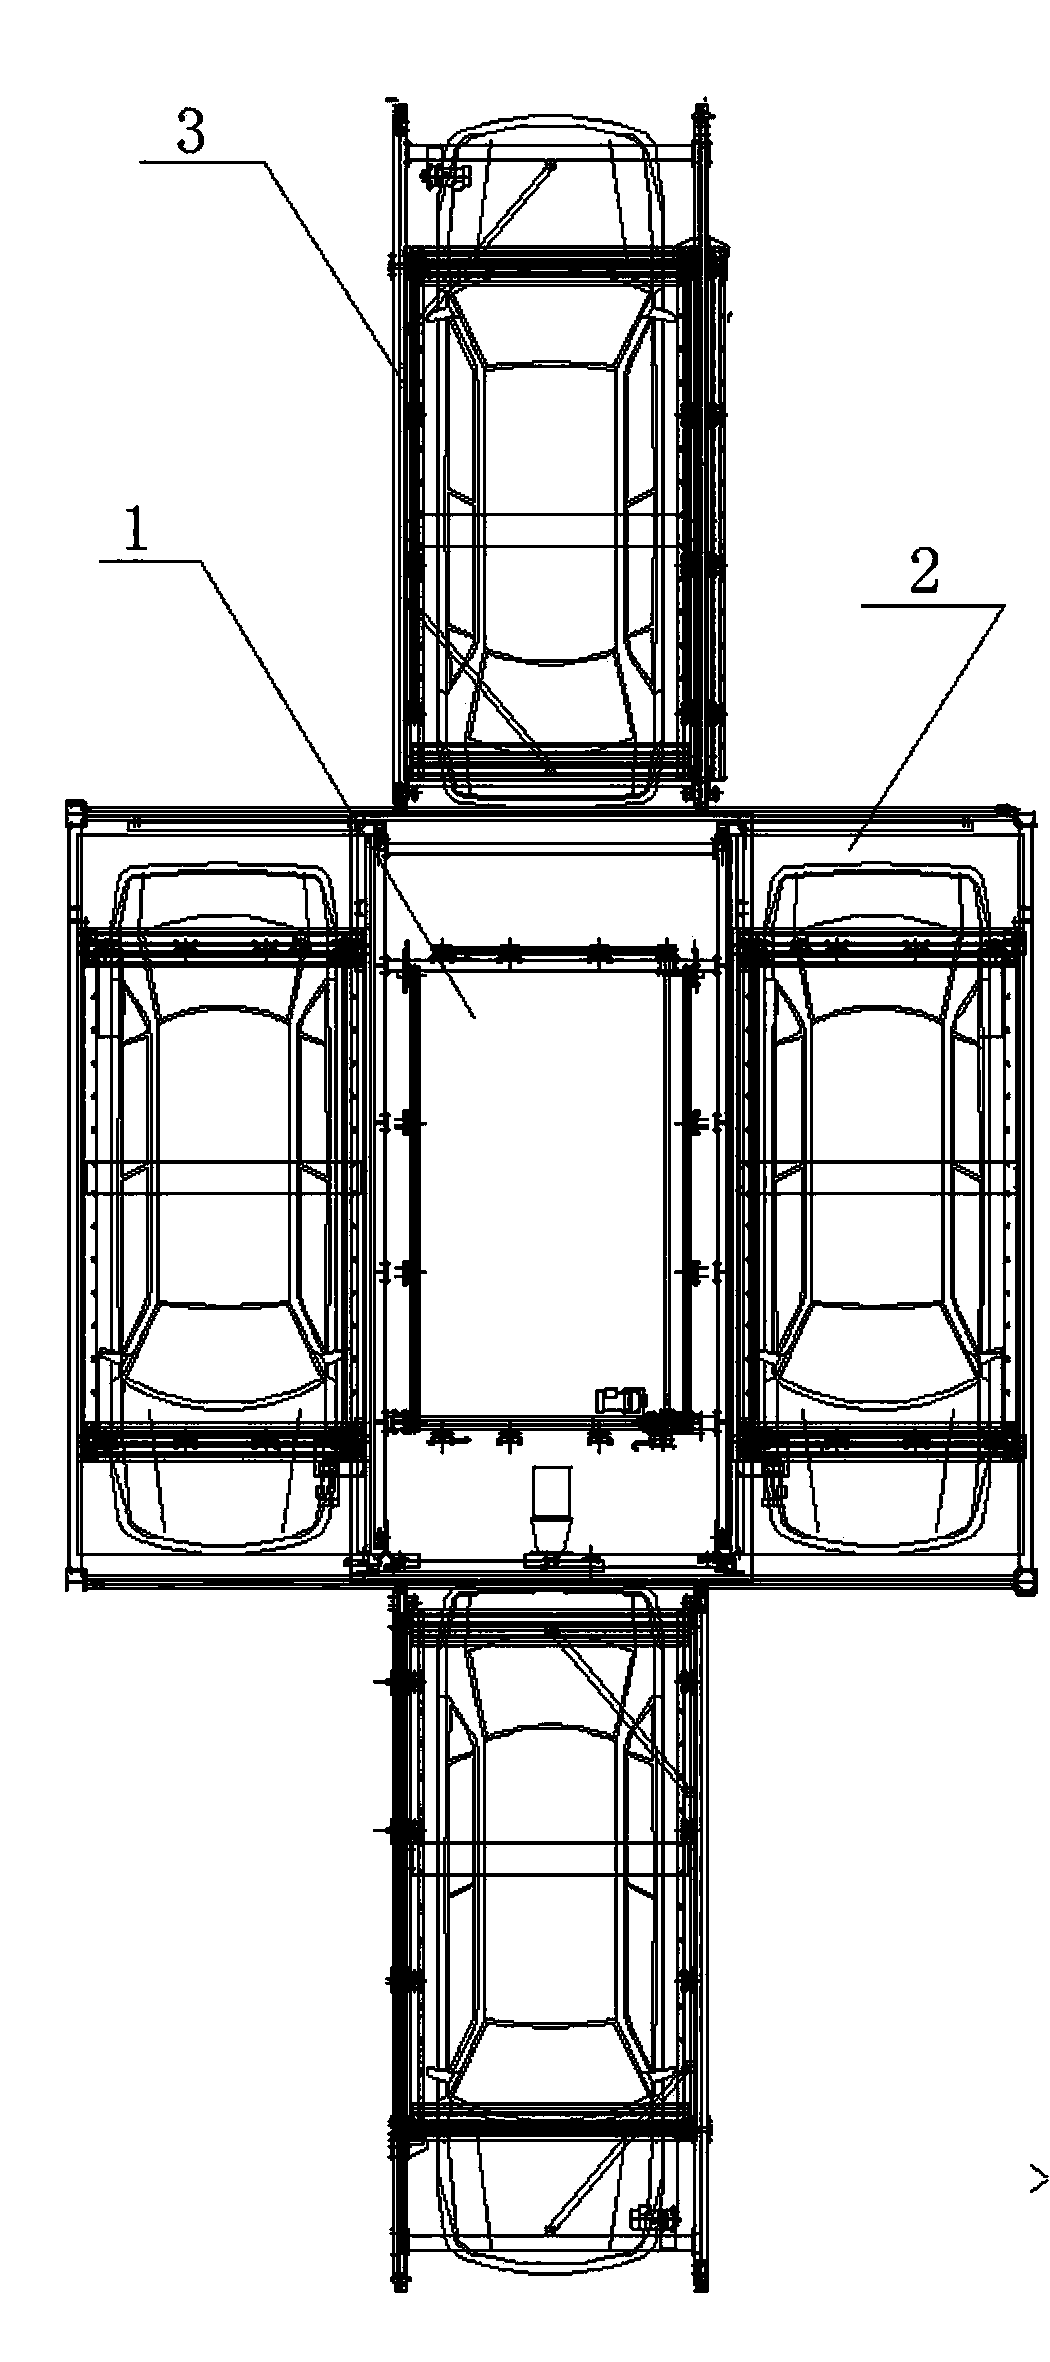 Four-way mobile vehicle parking and getting mechanism